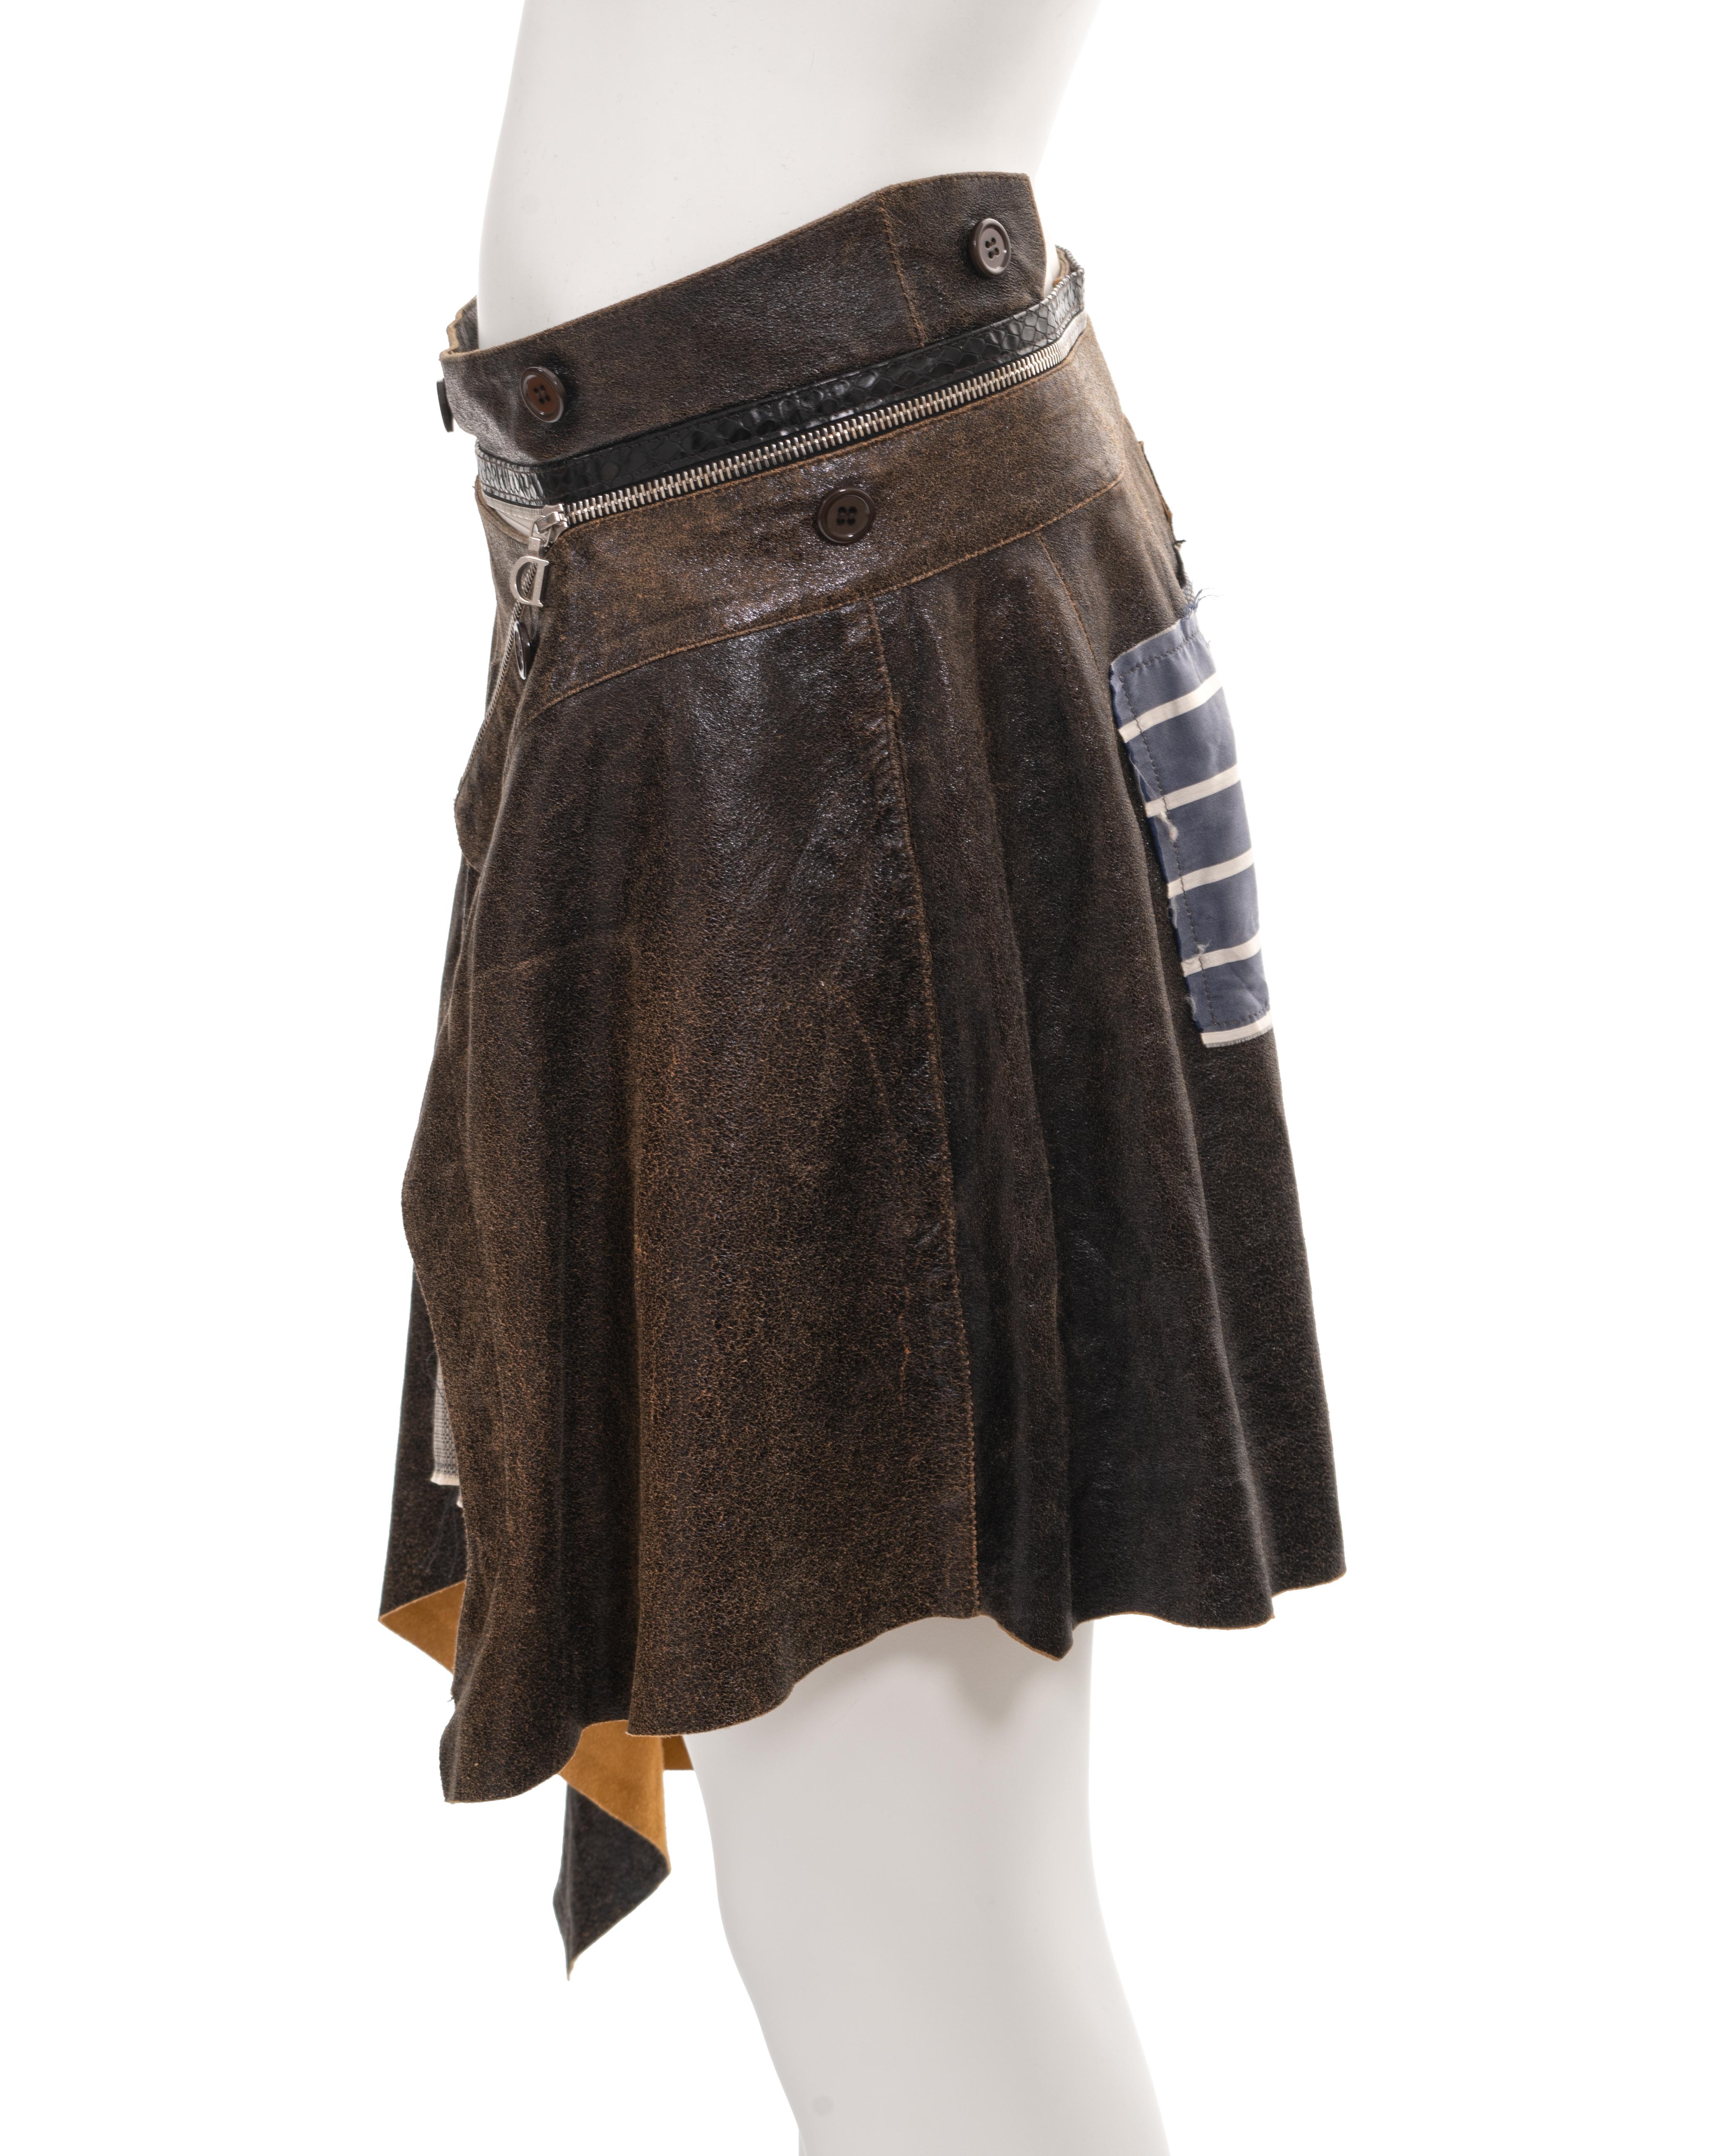 Christian Dior by John Galliano deconstructed brown leather wrap skirt, ss 2001 For Sale 4